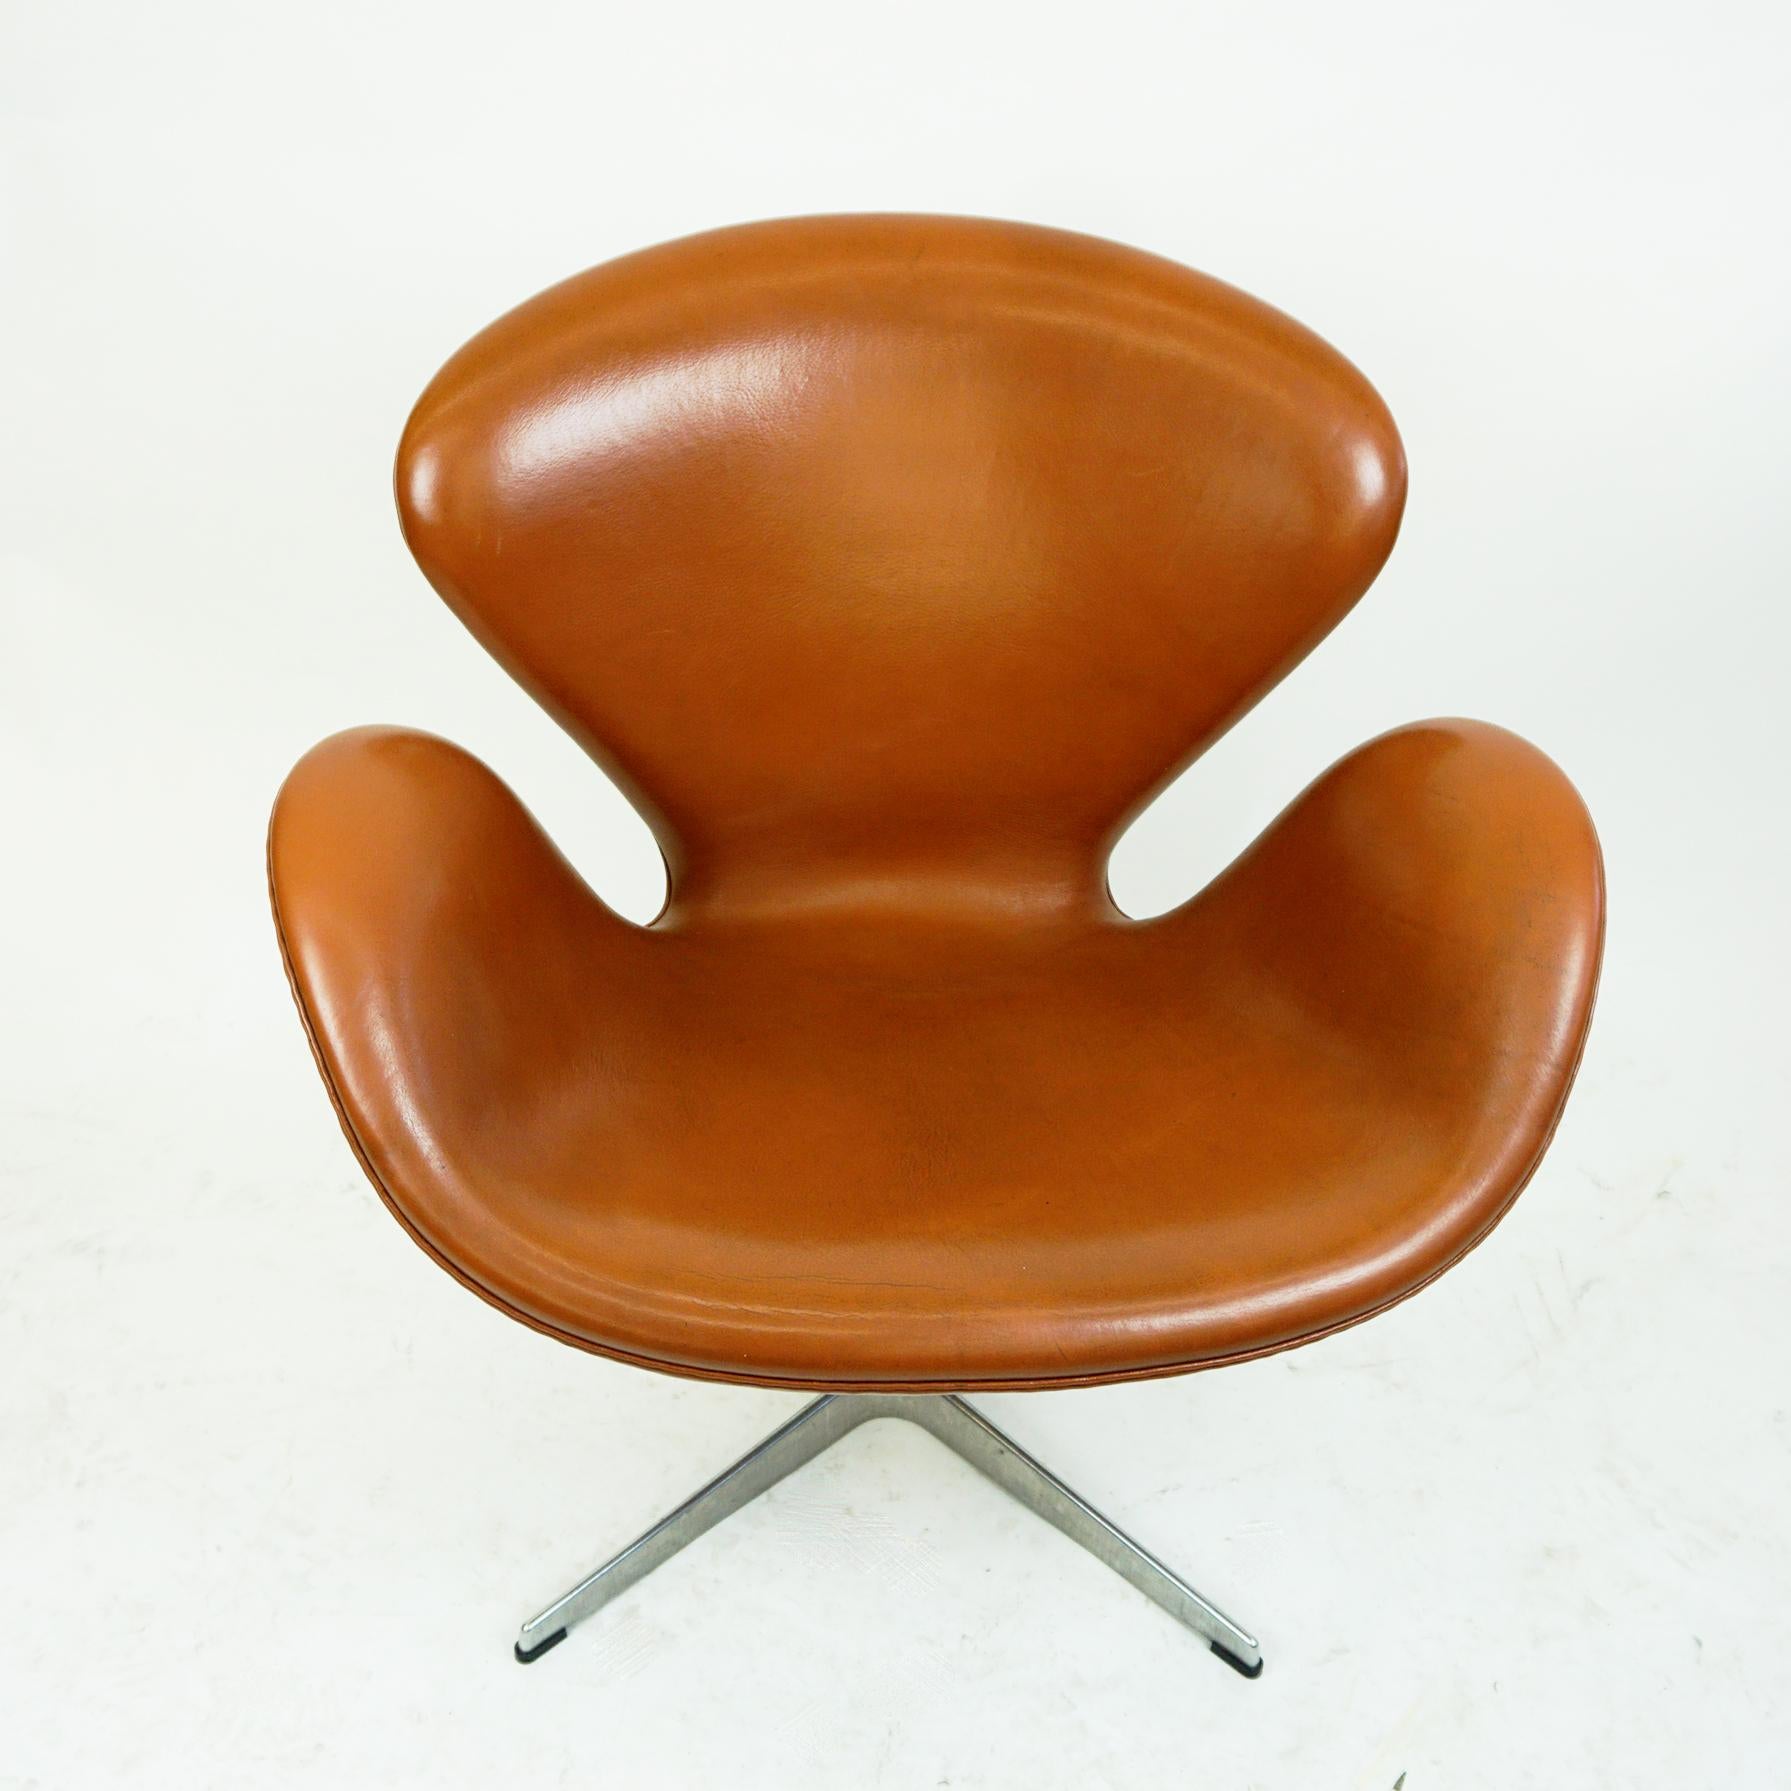 Beautiful cognac brown leather Swan lounge chairs model 3320, designed by Arne Jacobsen 1958 for the SAS Royal Copenhagen Hotel which opened in 1960. This one is produced by Fritz Hansen 2008 as you can see on it´s original label. It has a moulded